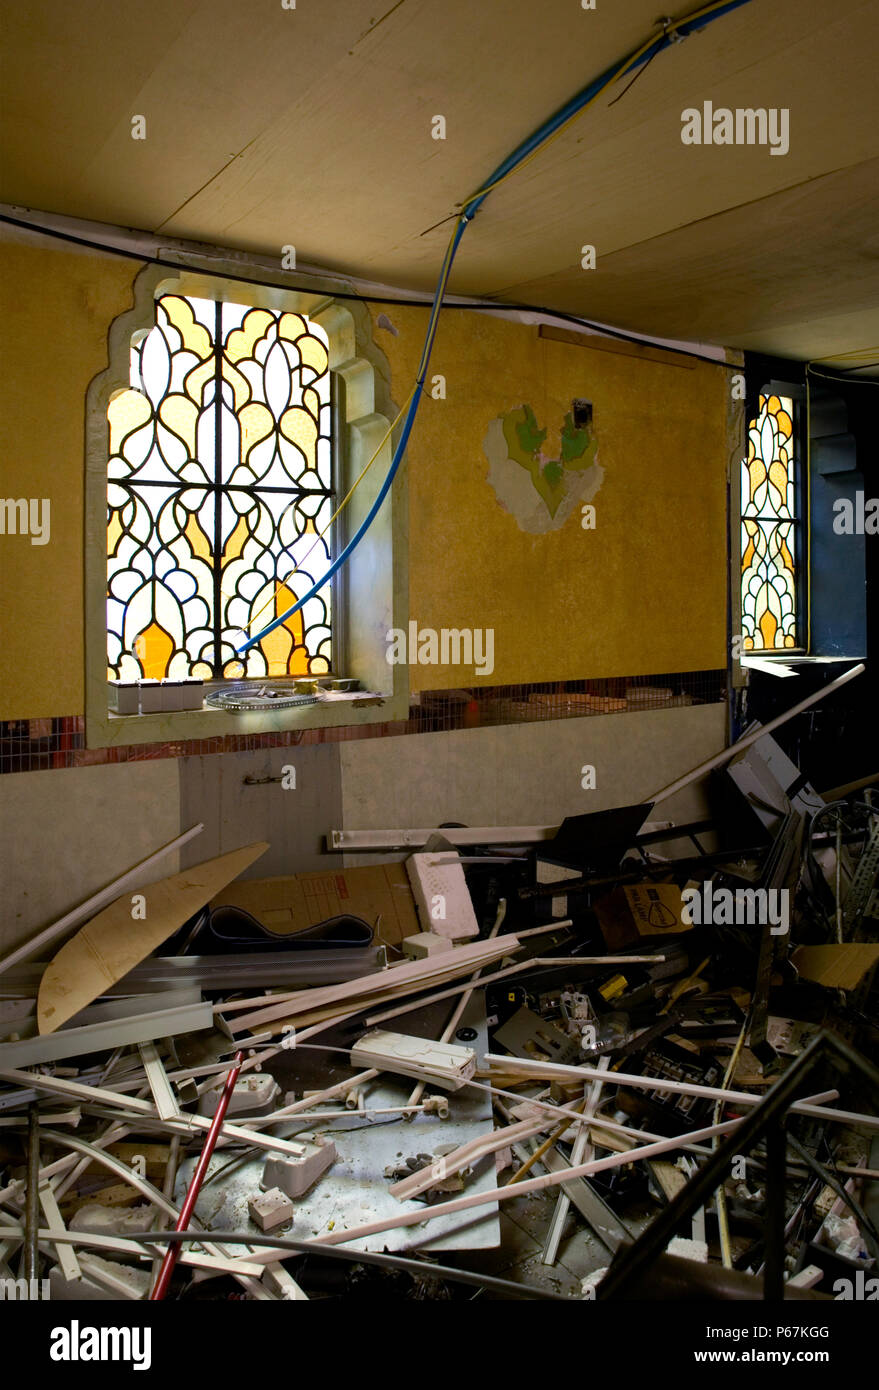 Demolition of old house with stained galss window Stock Photo